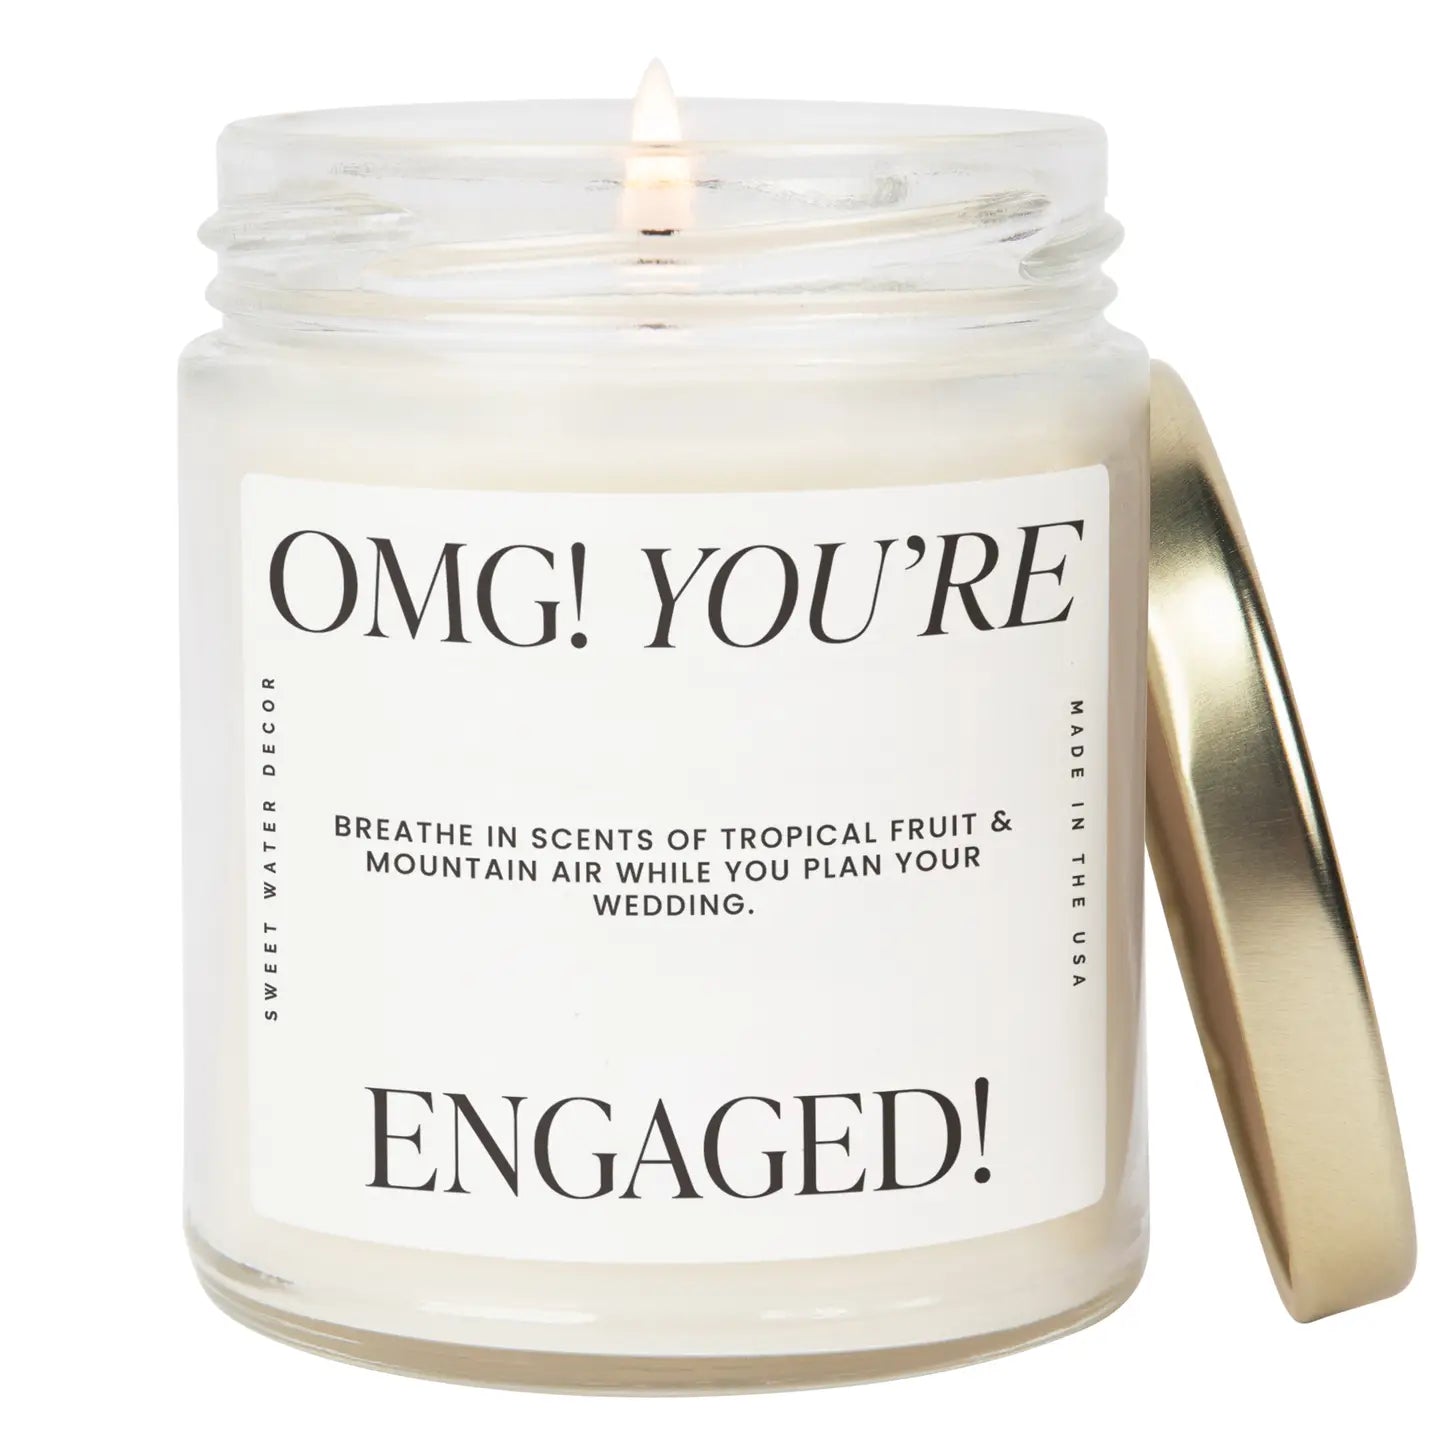 omg! you're engaged candle